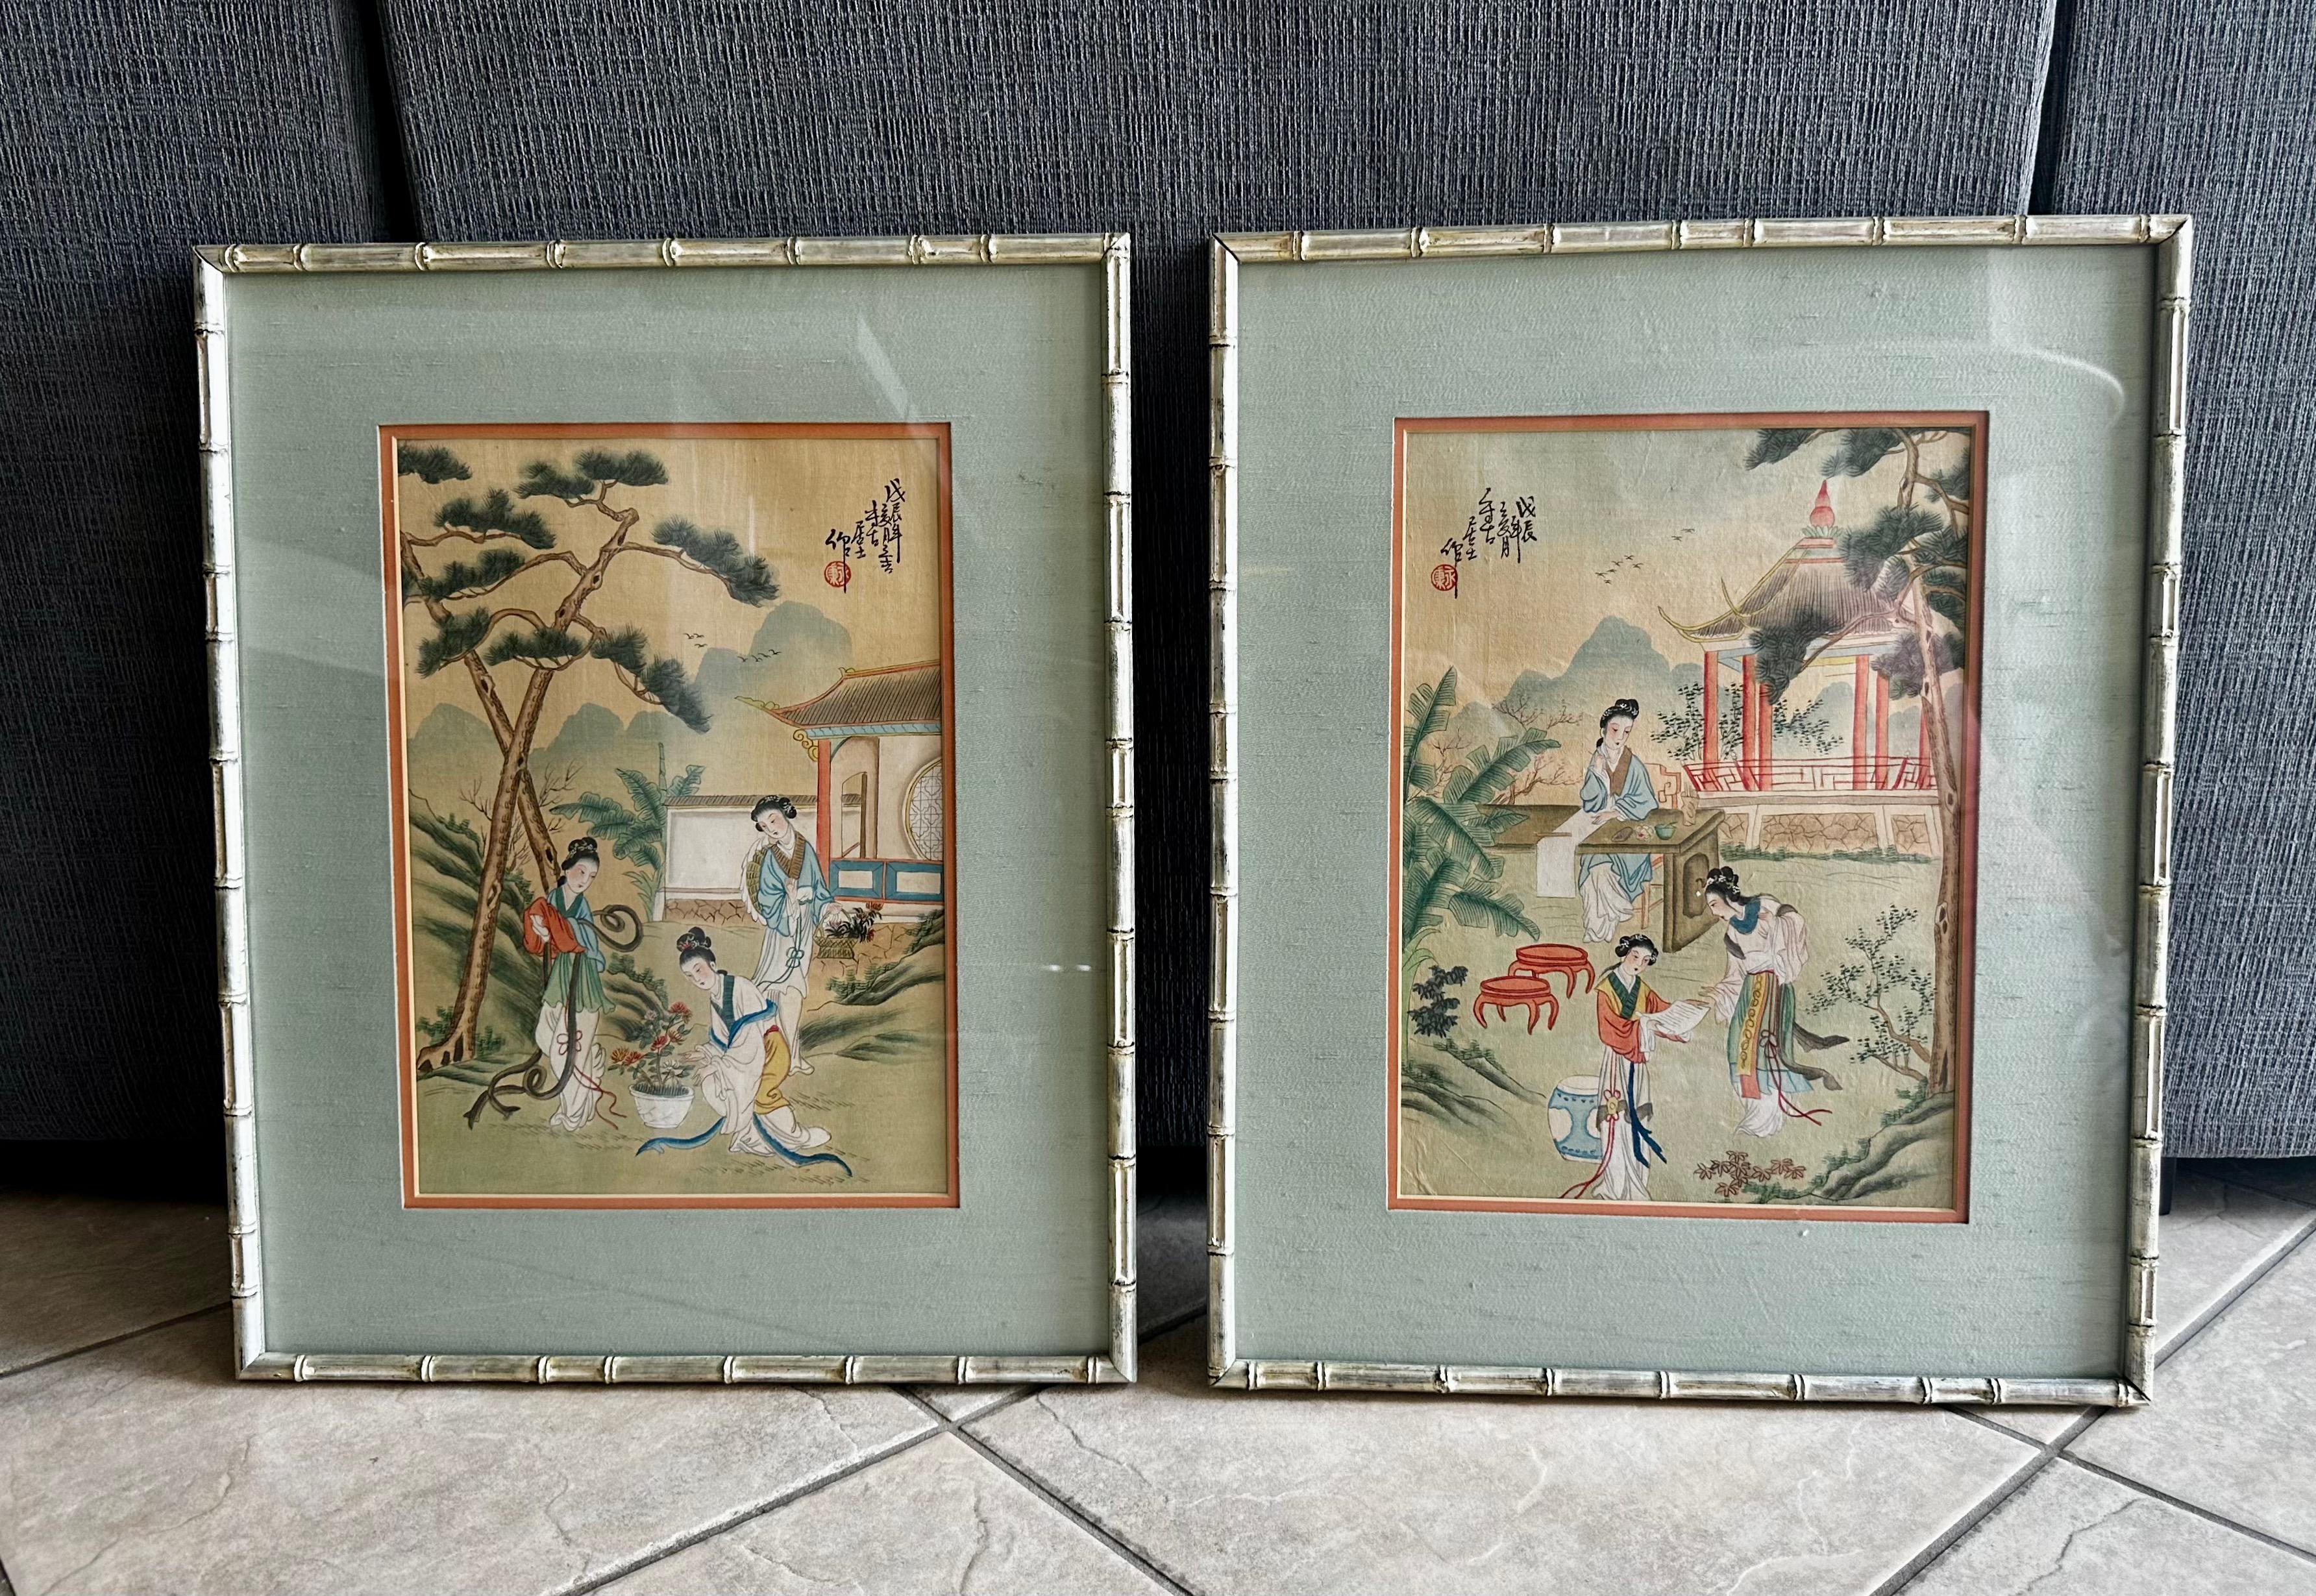 Pair early 20th century Chinese silk paintings depicting elegant ladies in robes in outdoor setting with trees, foliage and Chinese architecture. Beautifully mounted in silver giltwood faux bamboo frames and silk matting. Both with calligraphy